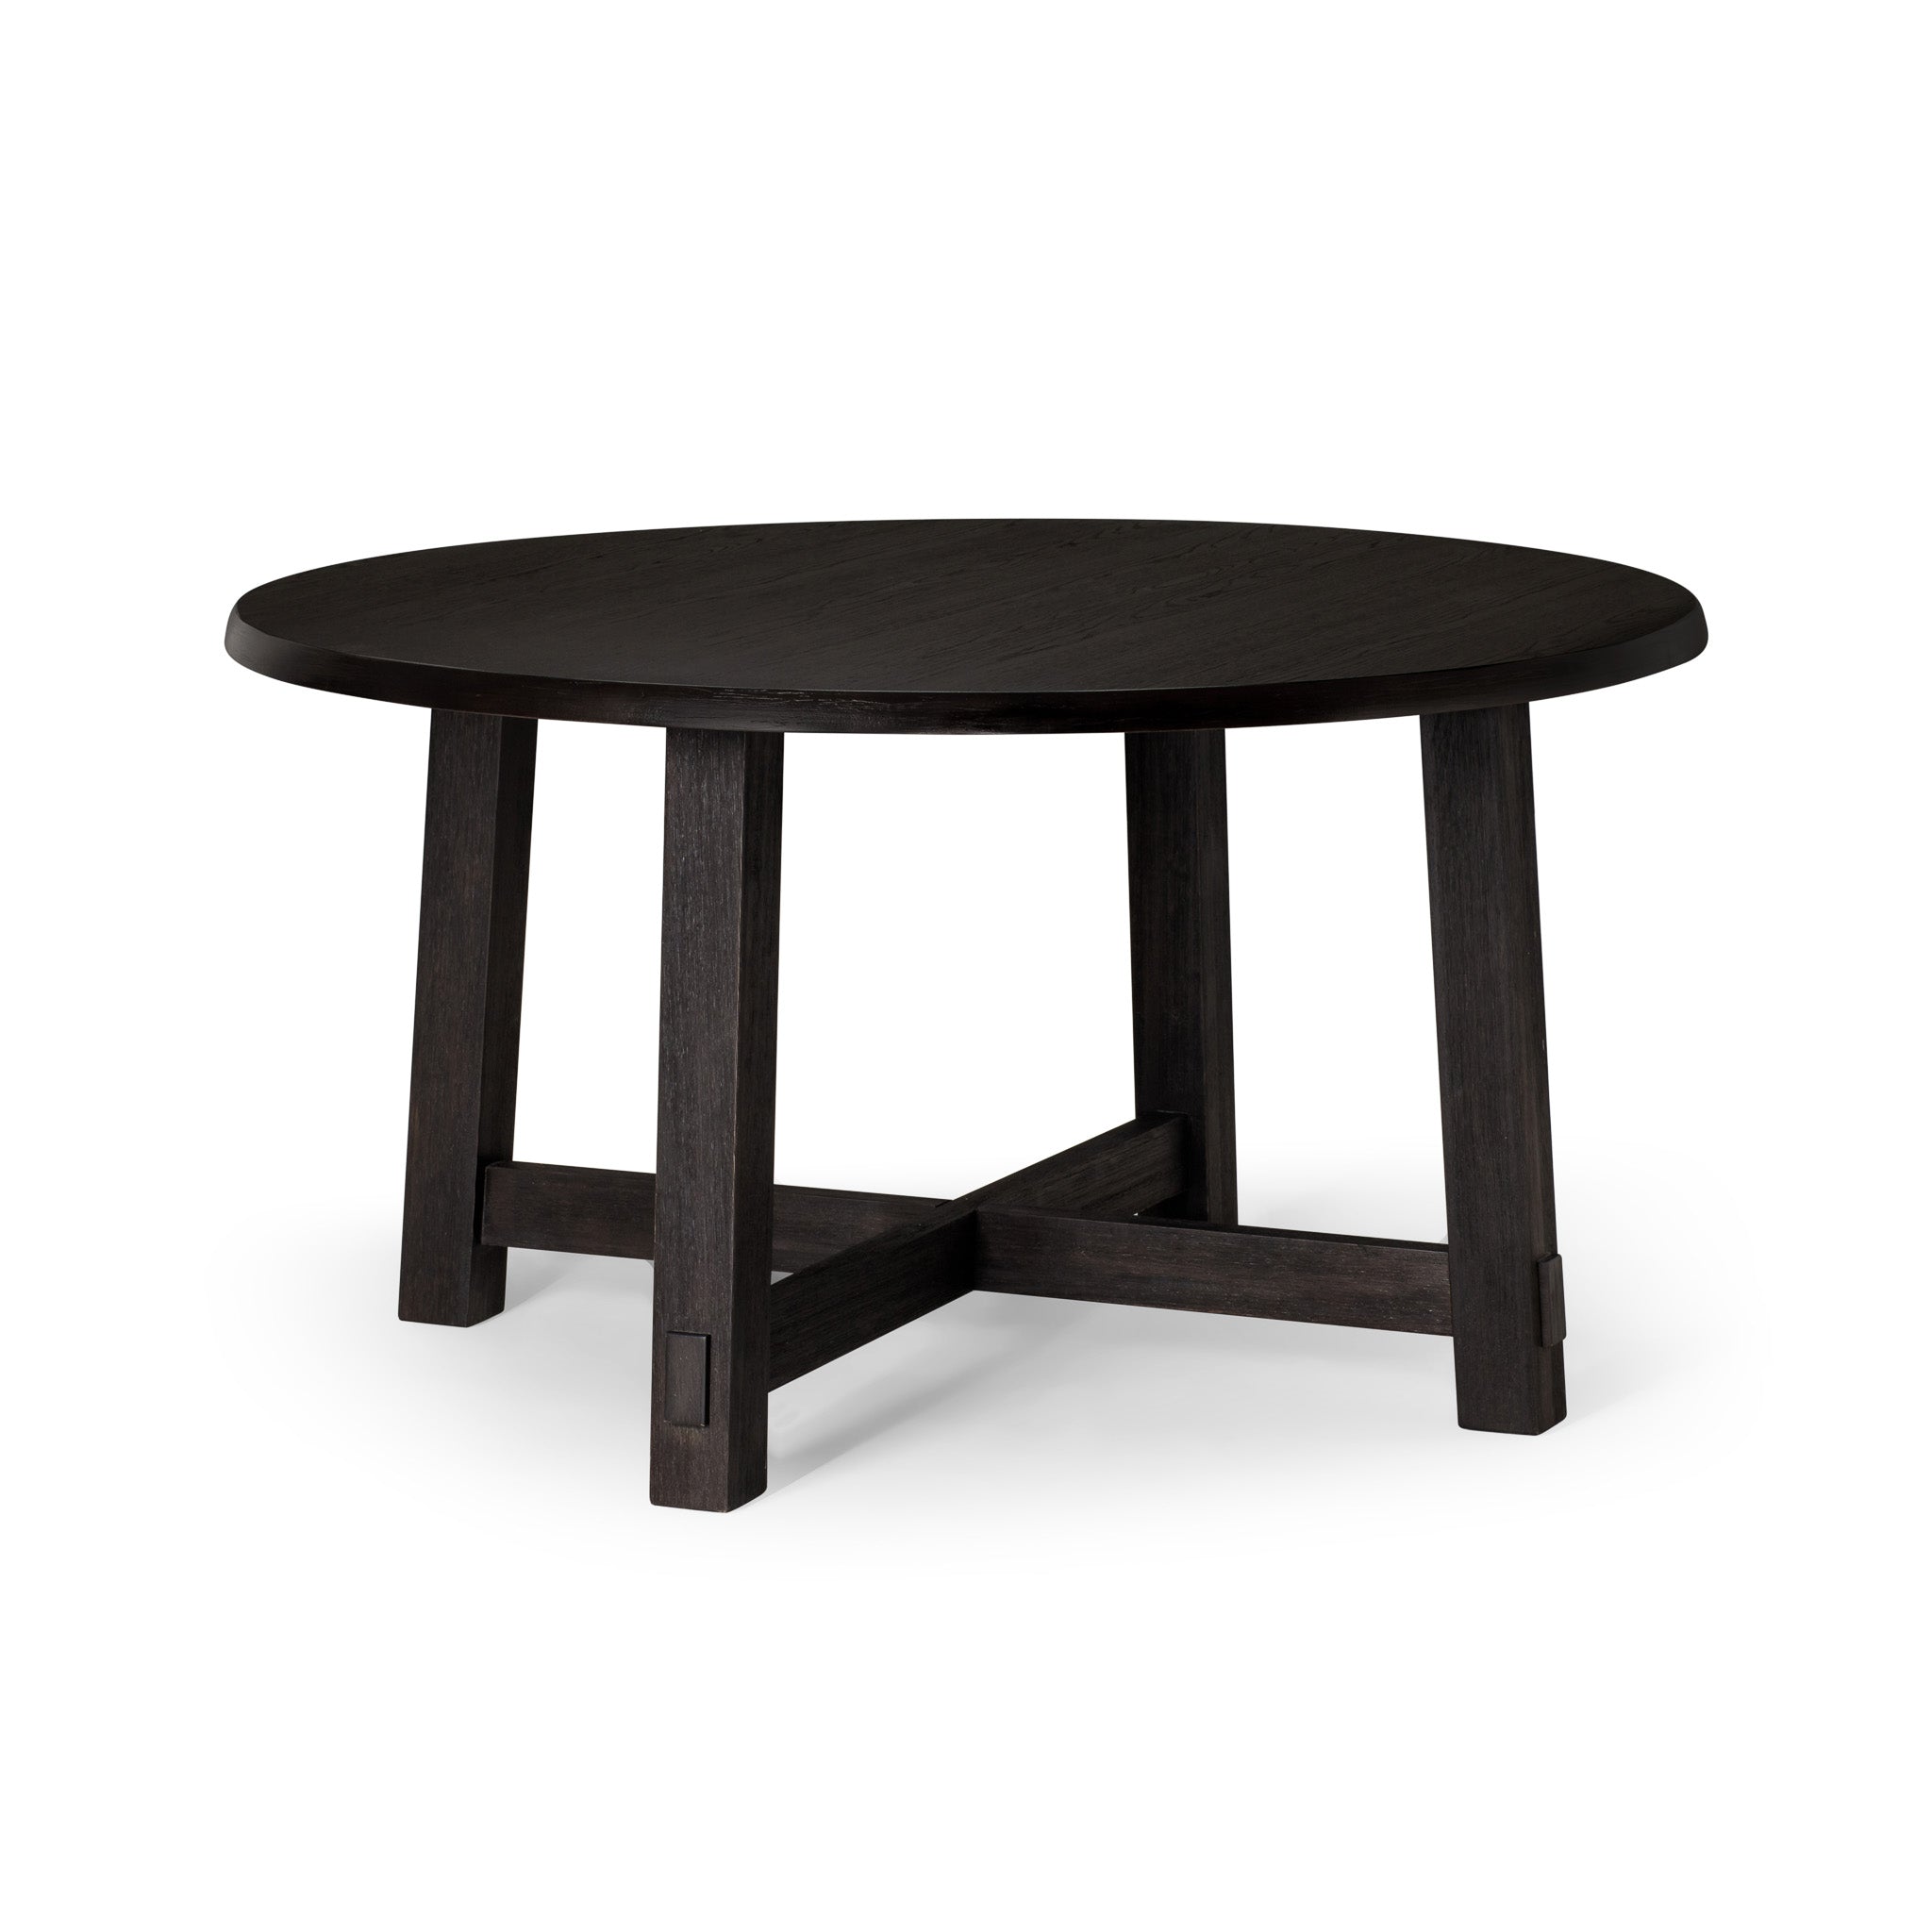 Sasha Organic Round Wooden Dining Table in Weathered Black Finish in Dining Furniture by Maven Lane